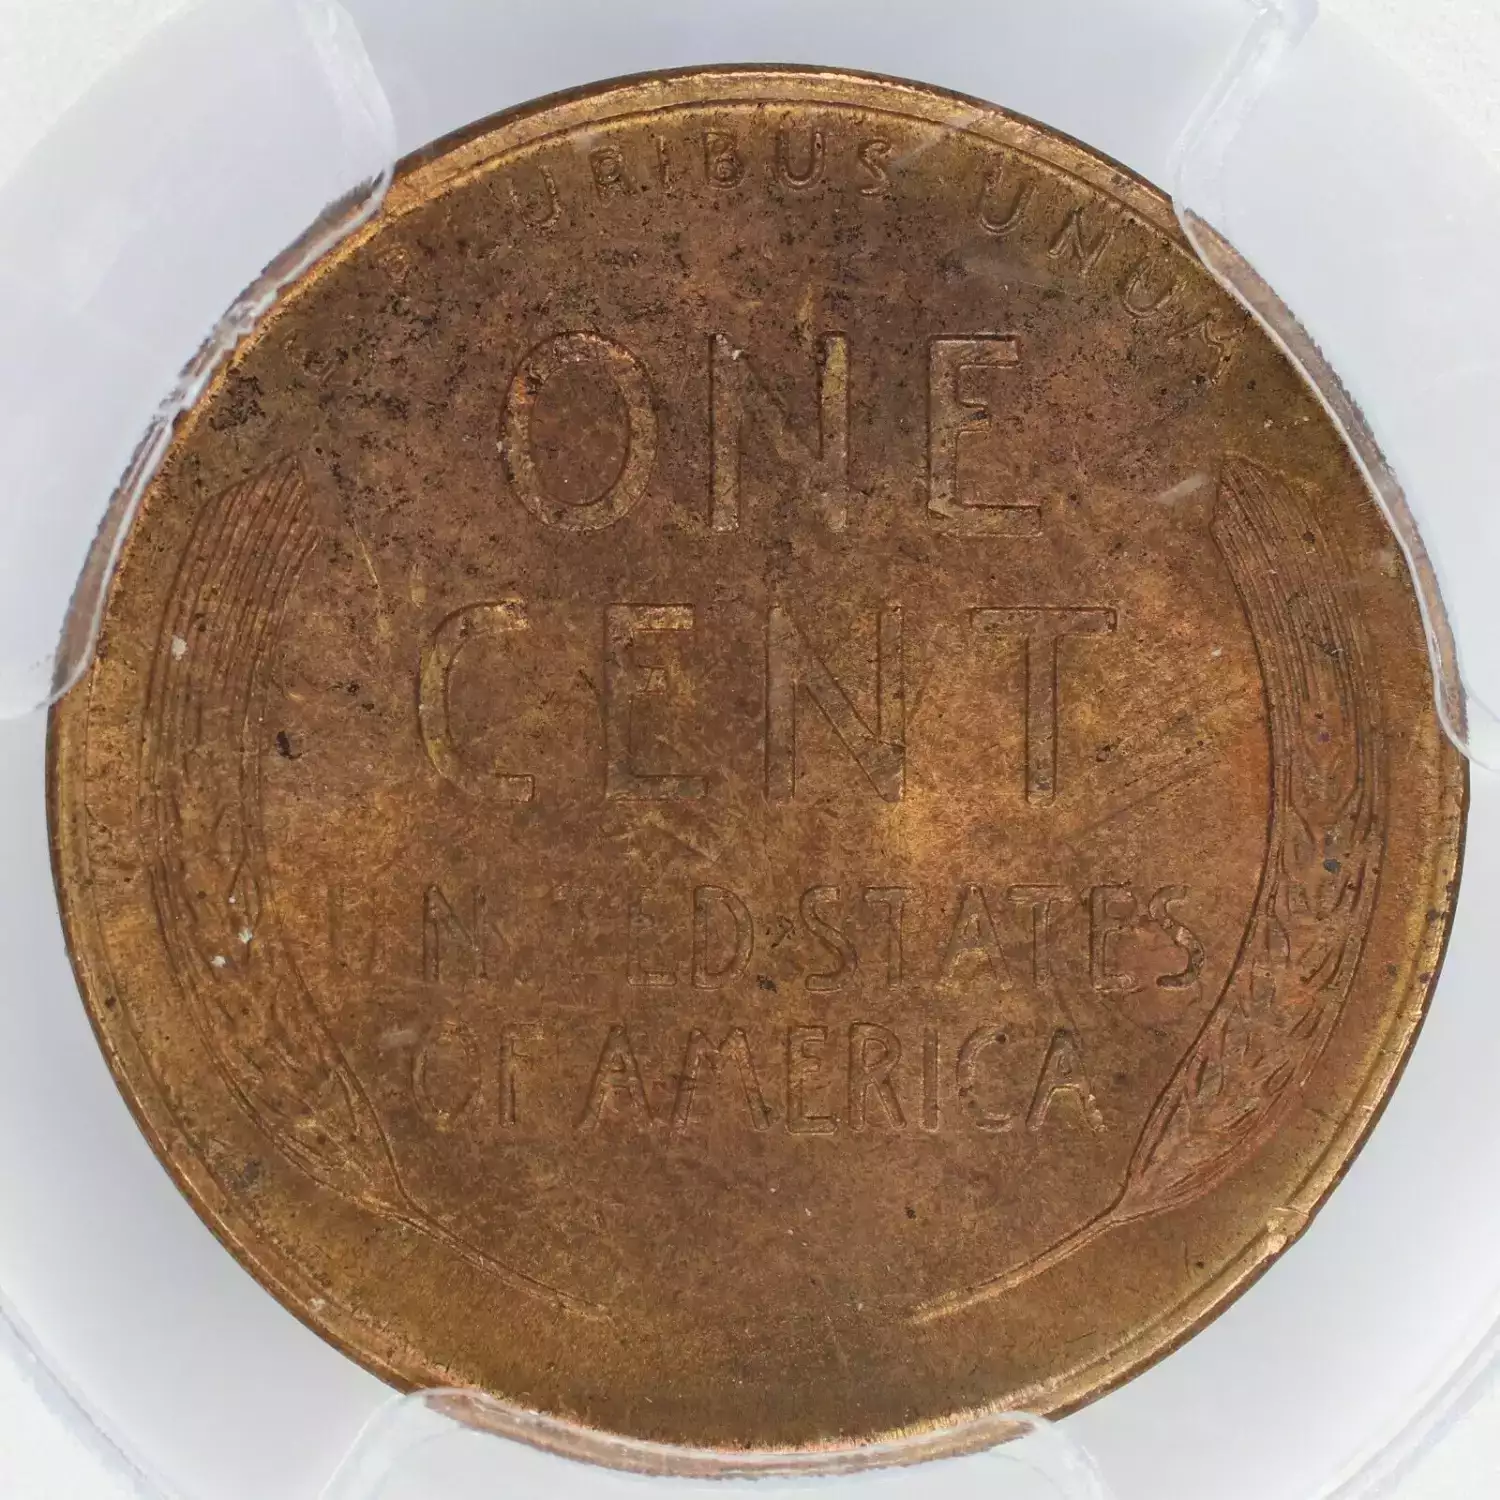 Small Cents-Lincoln, Wheat Ears Reverse 1909-1958